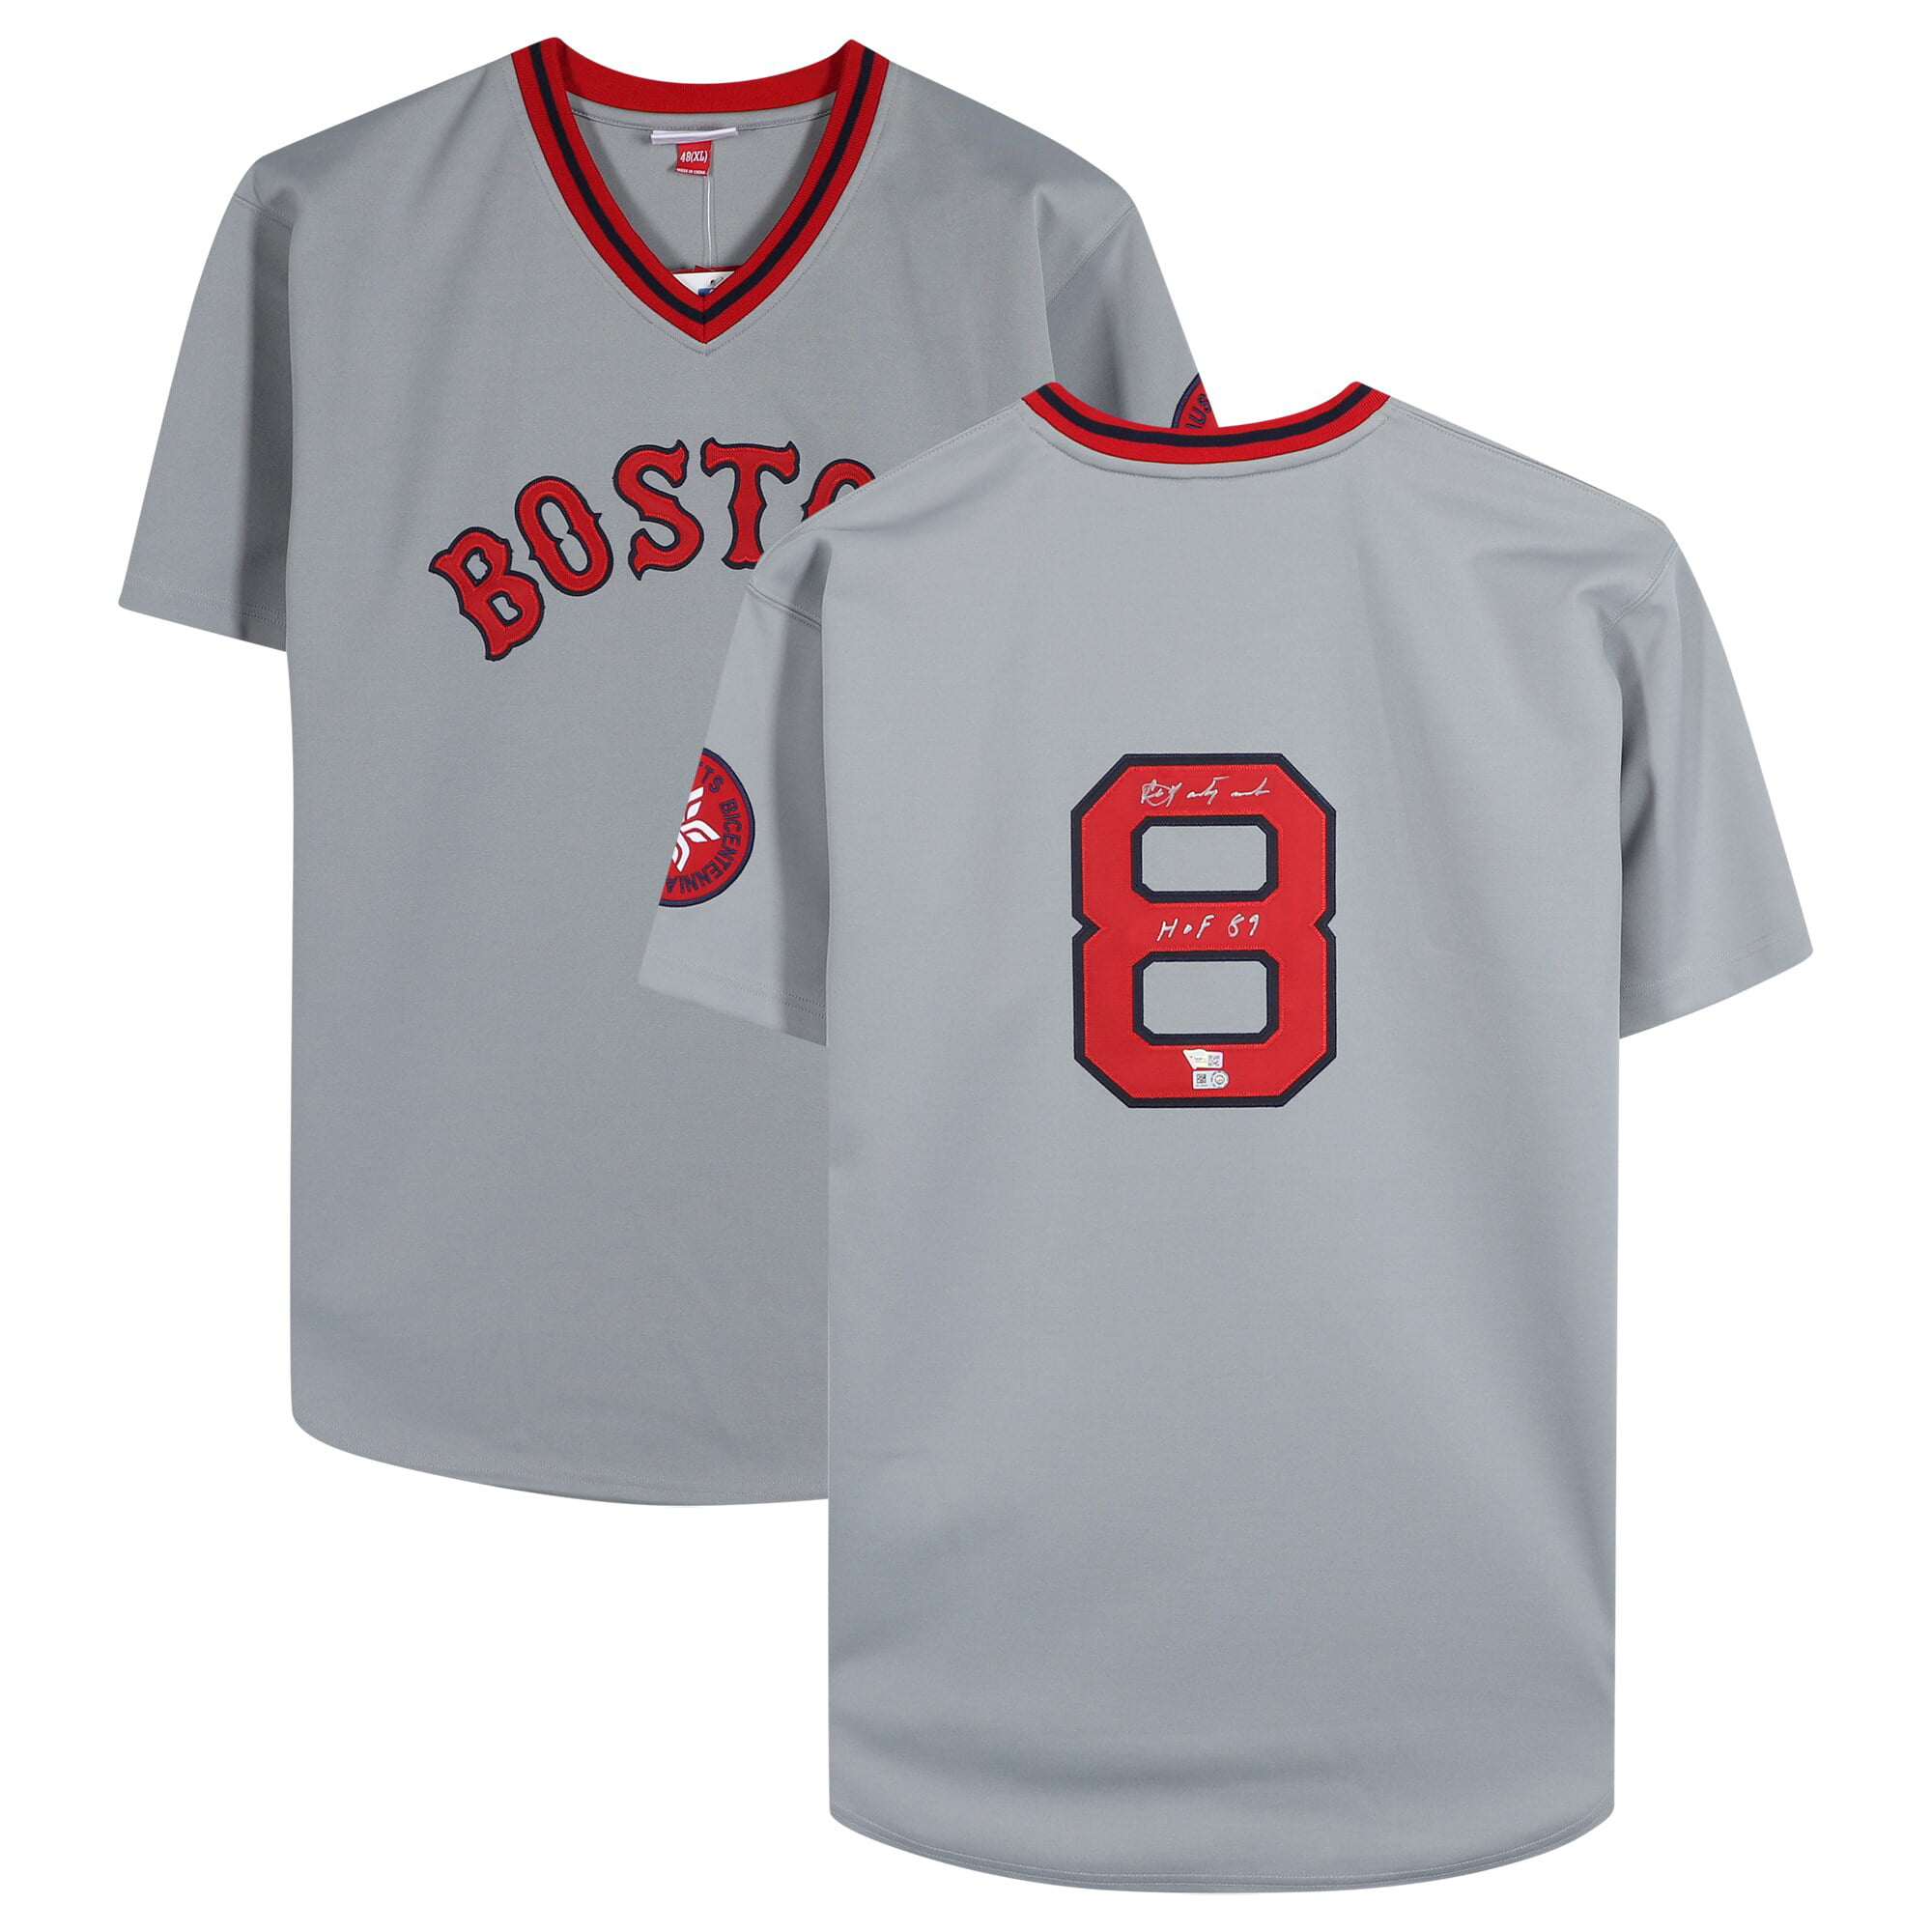 Carl Yastrzemski Gray Boston Red Sox Autographed Mitchell and Ness  Authentic Jersey with HOF 89 Inscription 